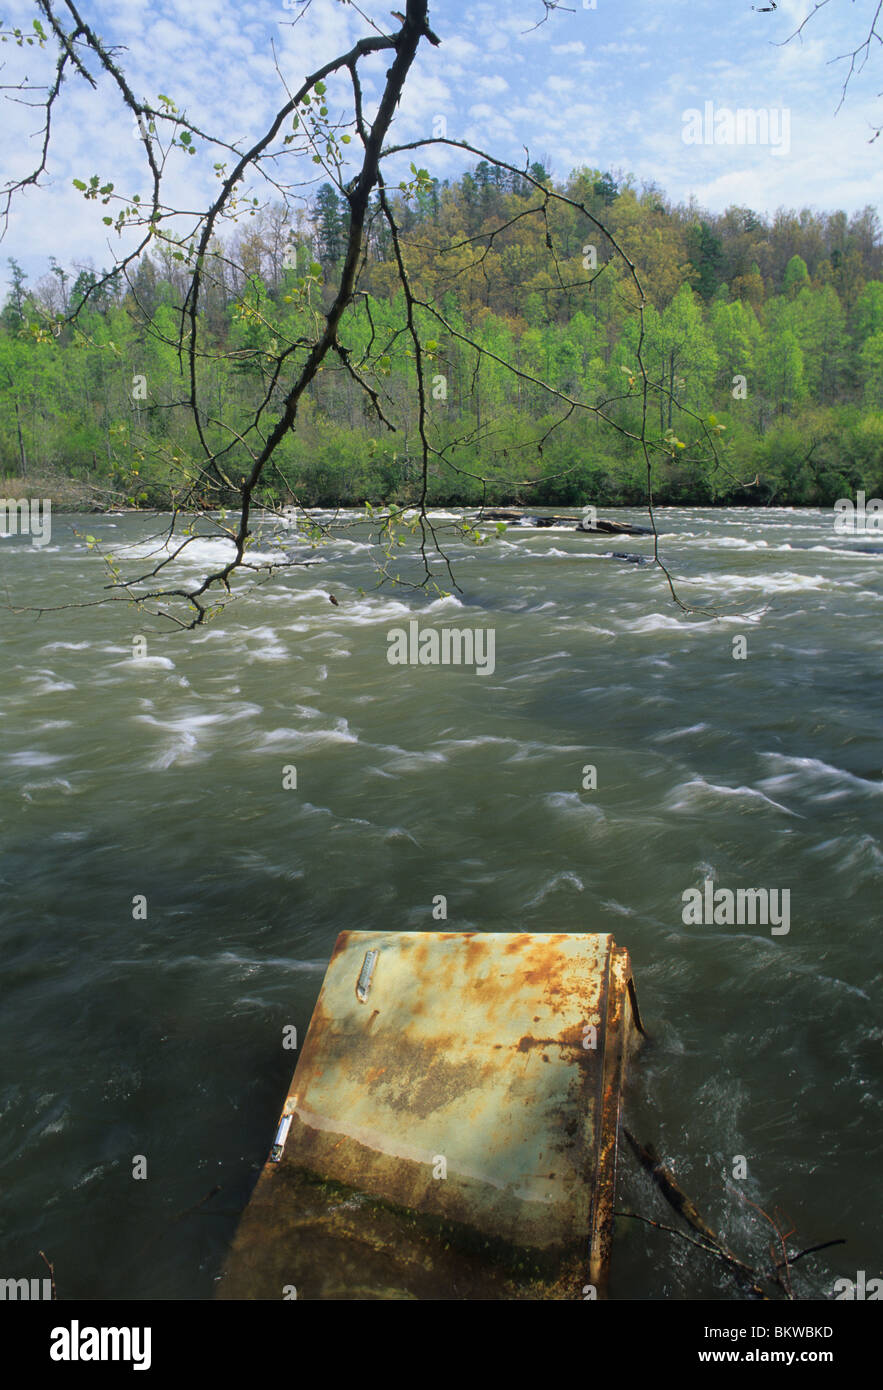 Water Pollution, old Refrigerator dumped in a mountain river Southeastern United States Stock Photo